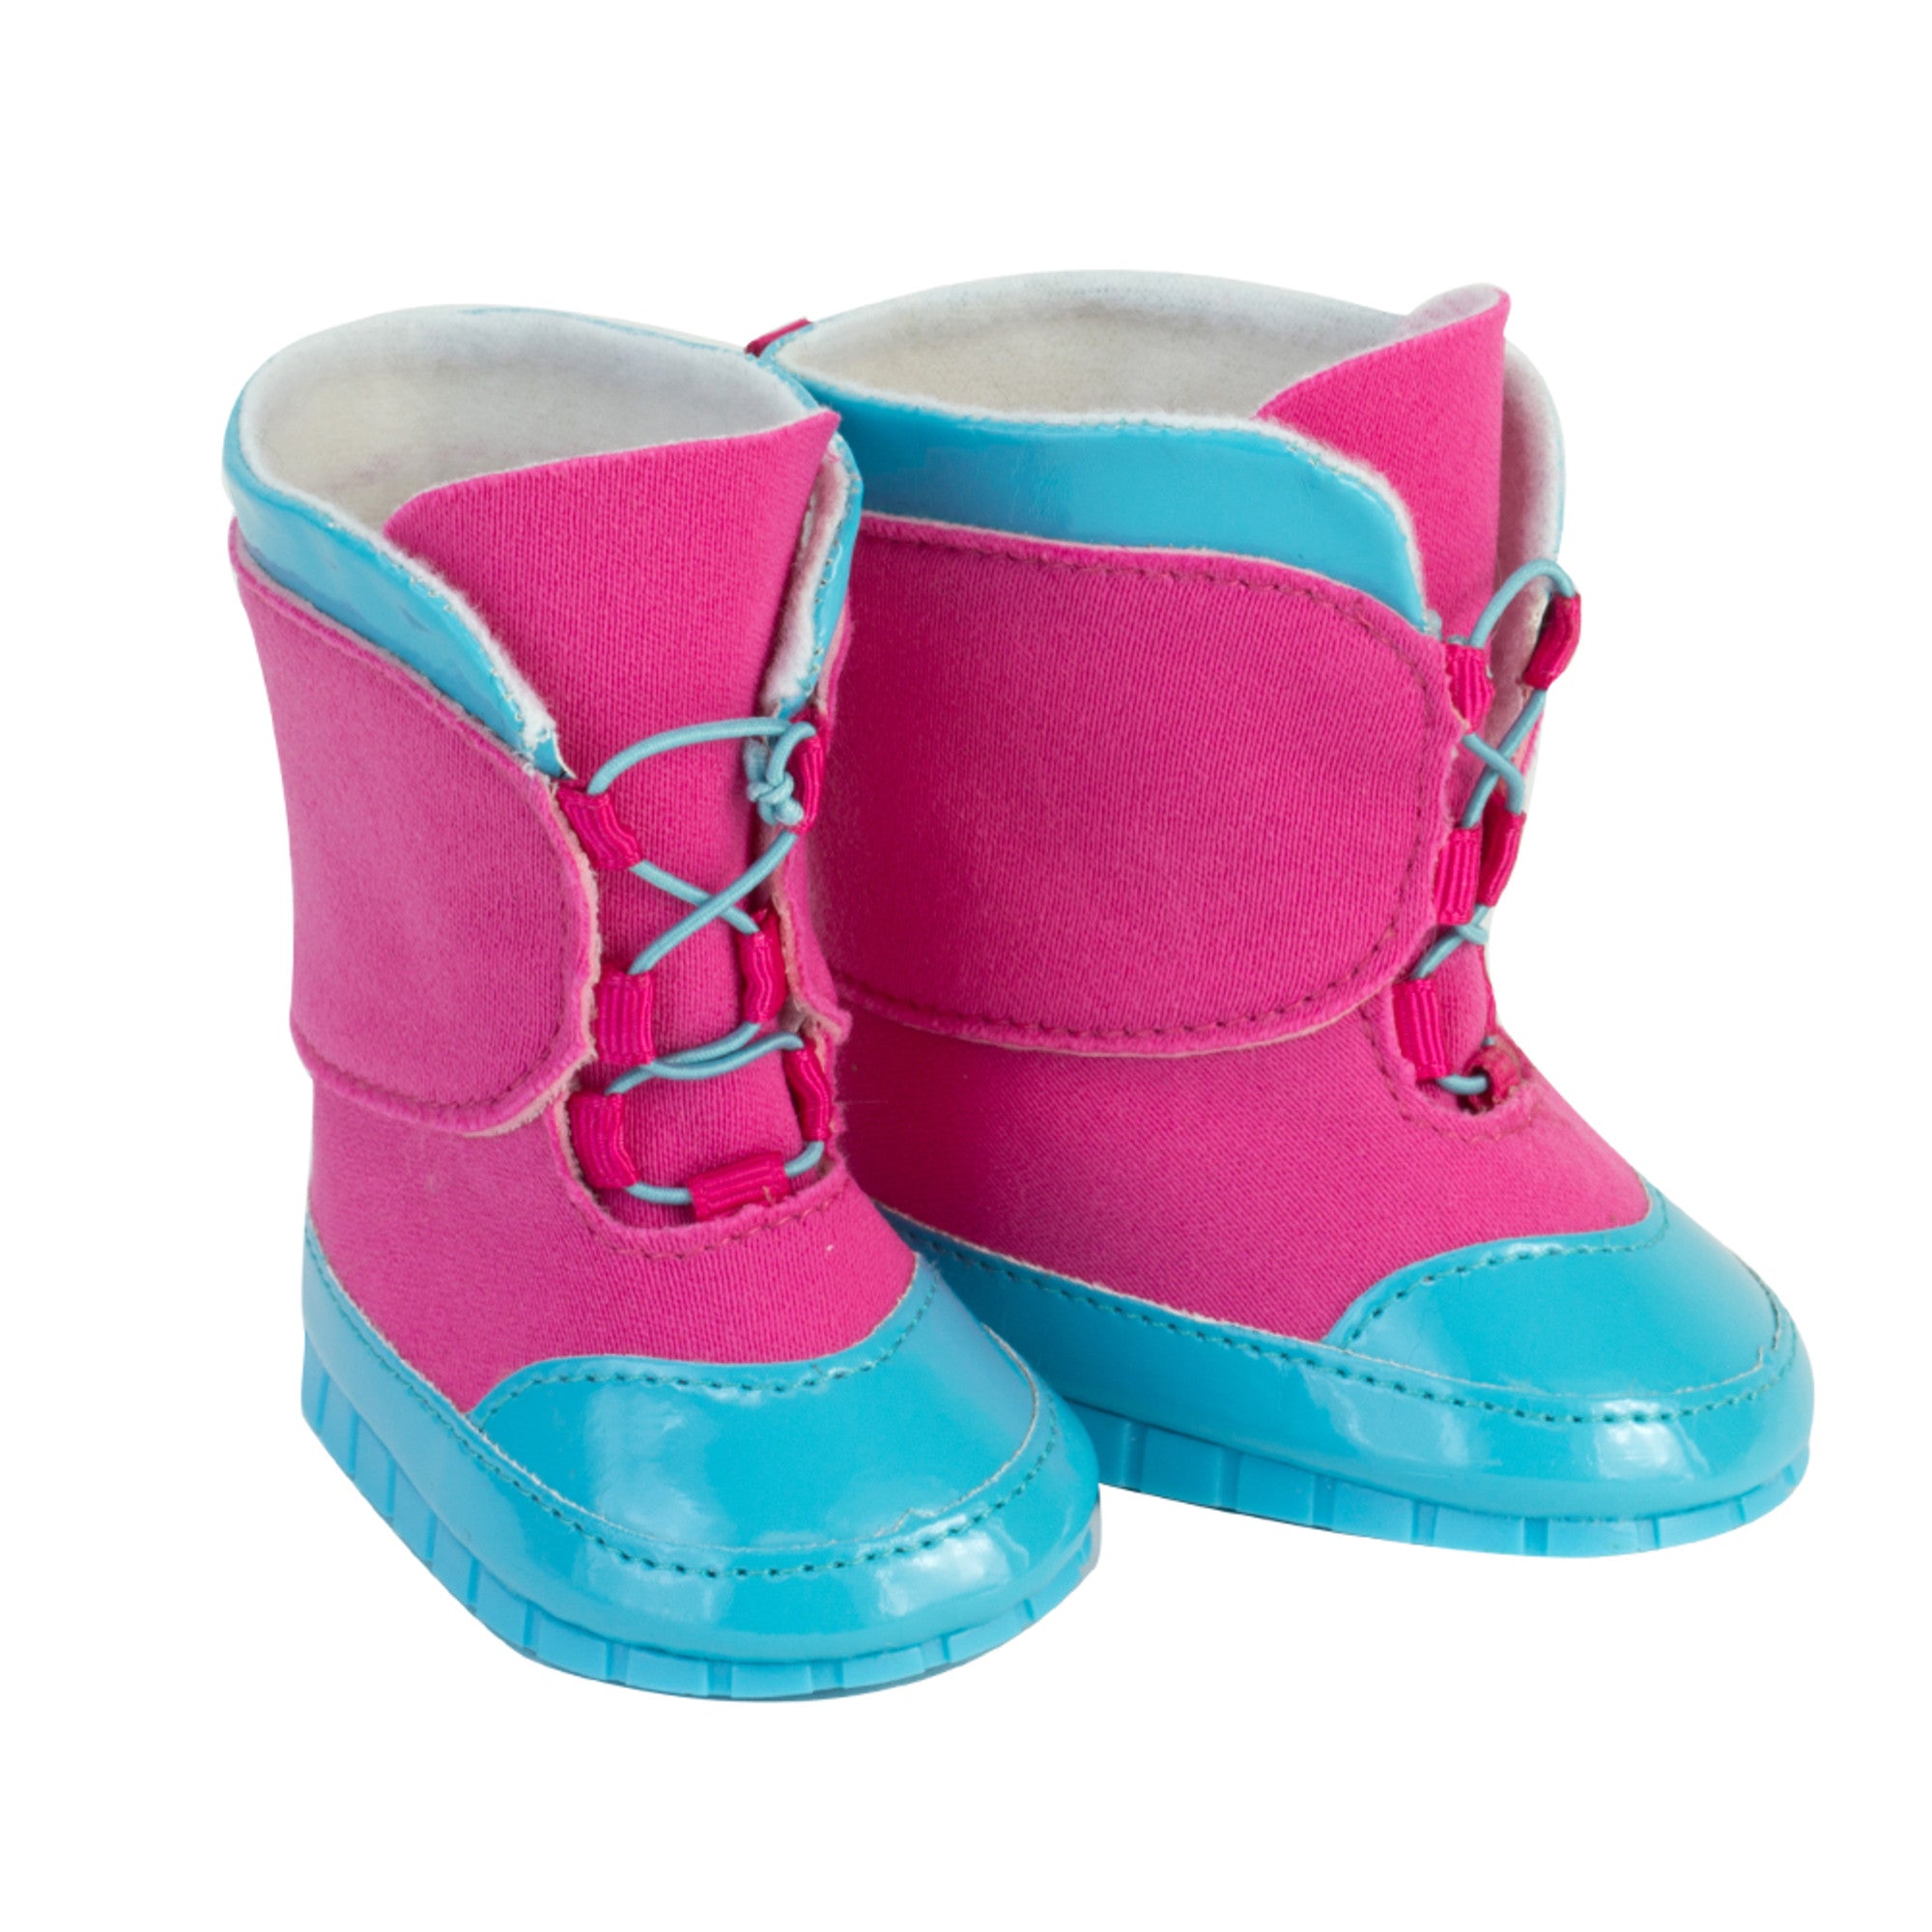 Sophia’s Colorful & Cute Seasonal Winter Mix & Match Two-Tone Slip-On Snow Boots for 18” Dolls, Hot Pink/Blue